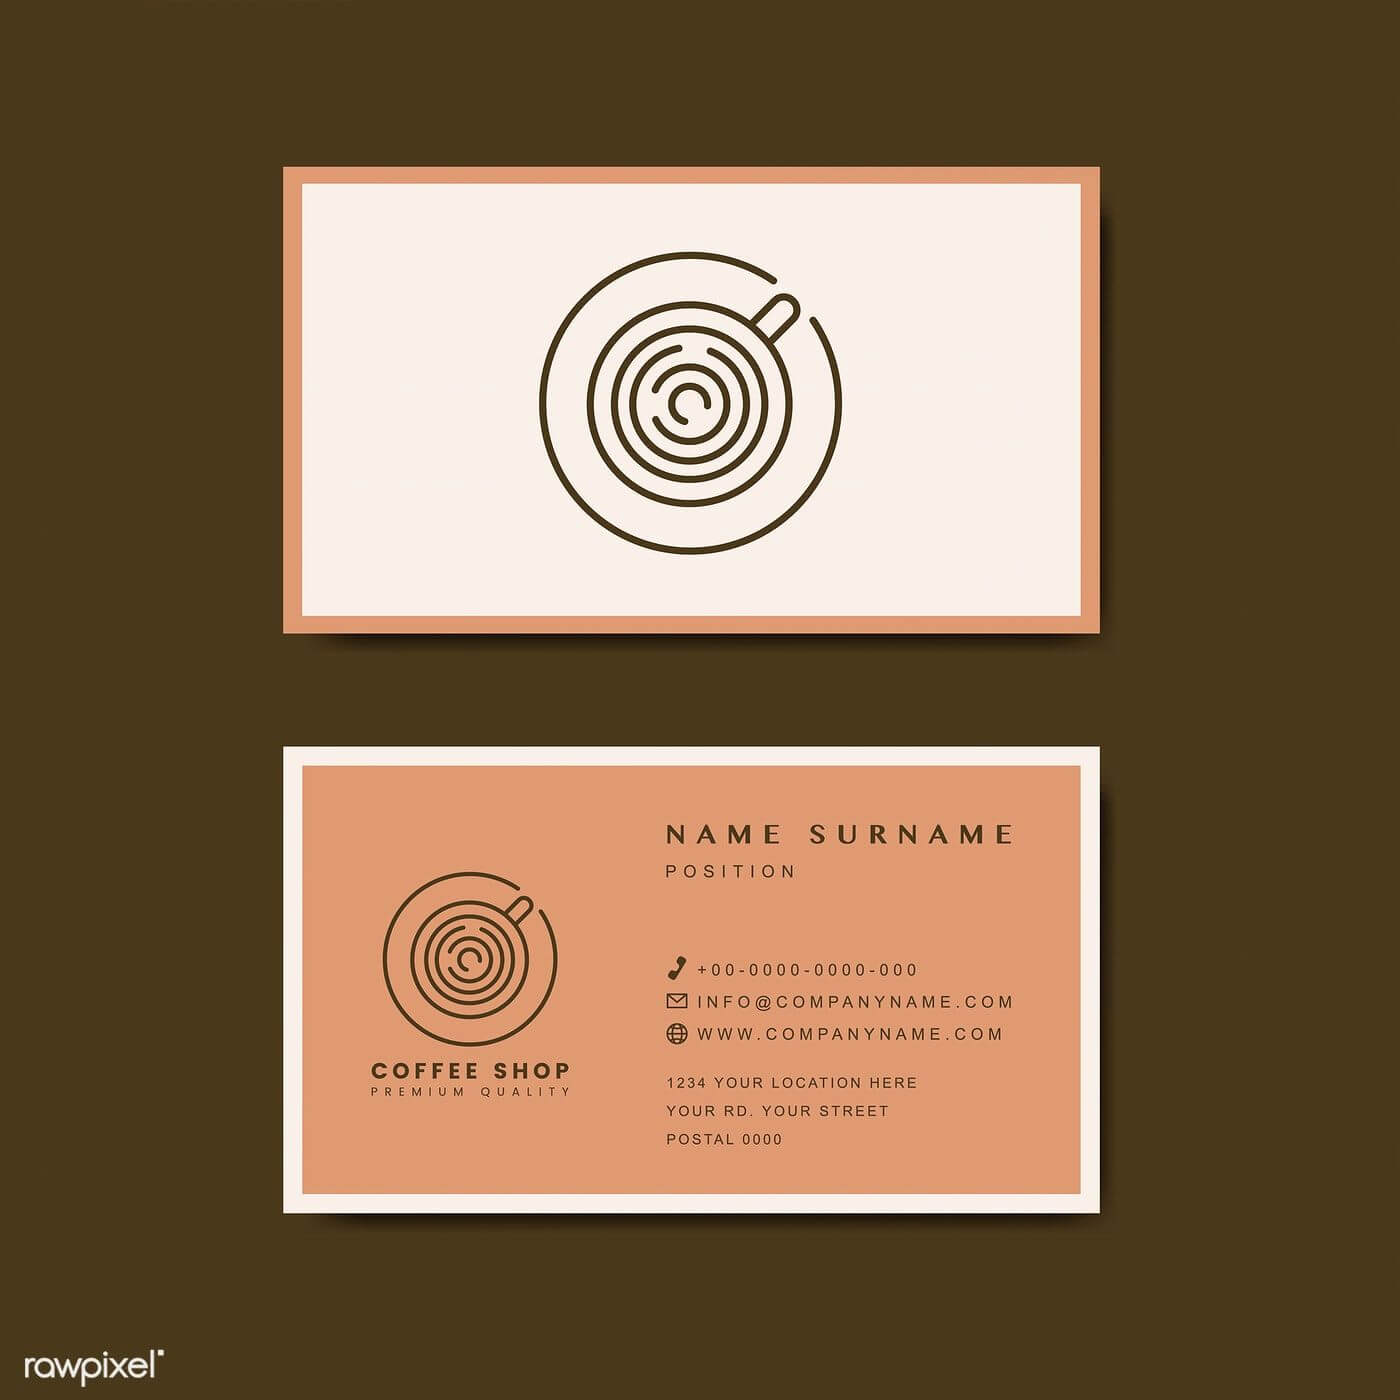 Coffee Shop Business Card Template Vector | Free Image Regarding Coffee Business Card Template Free